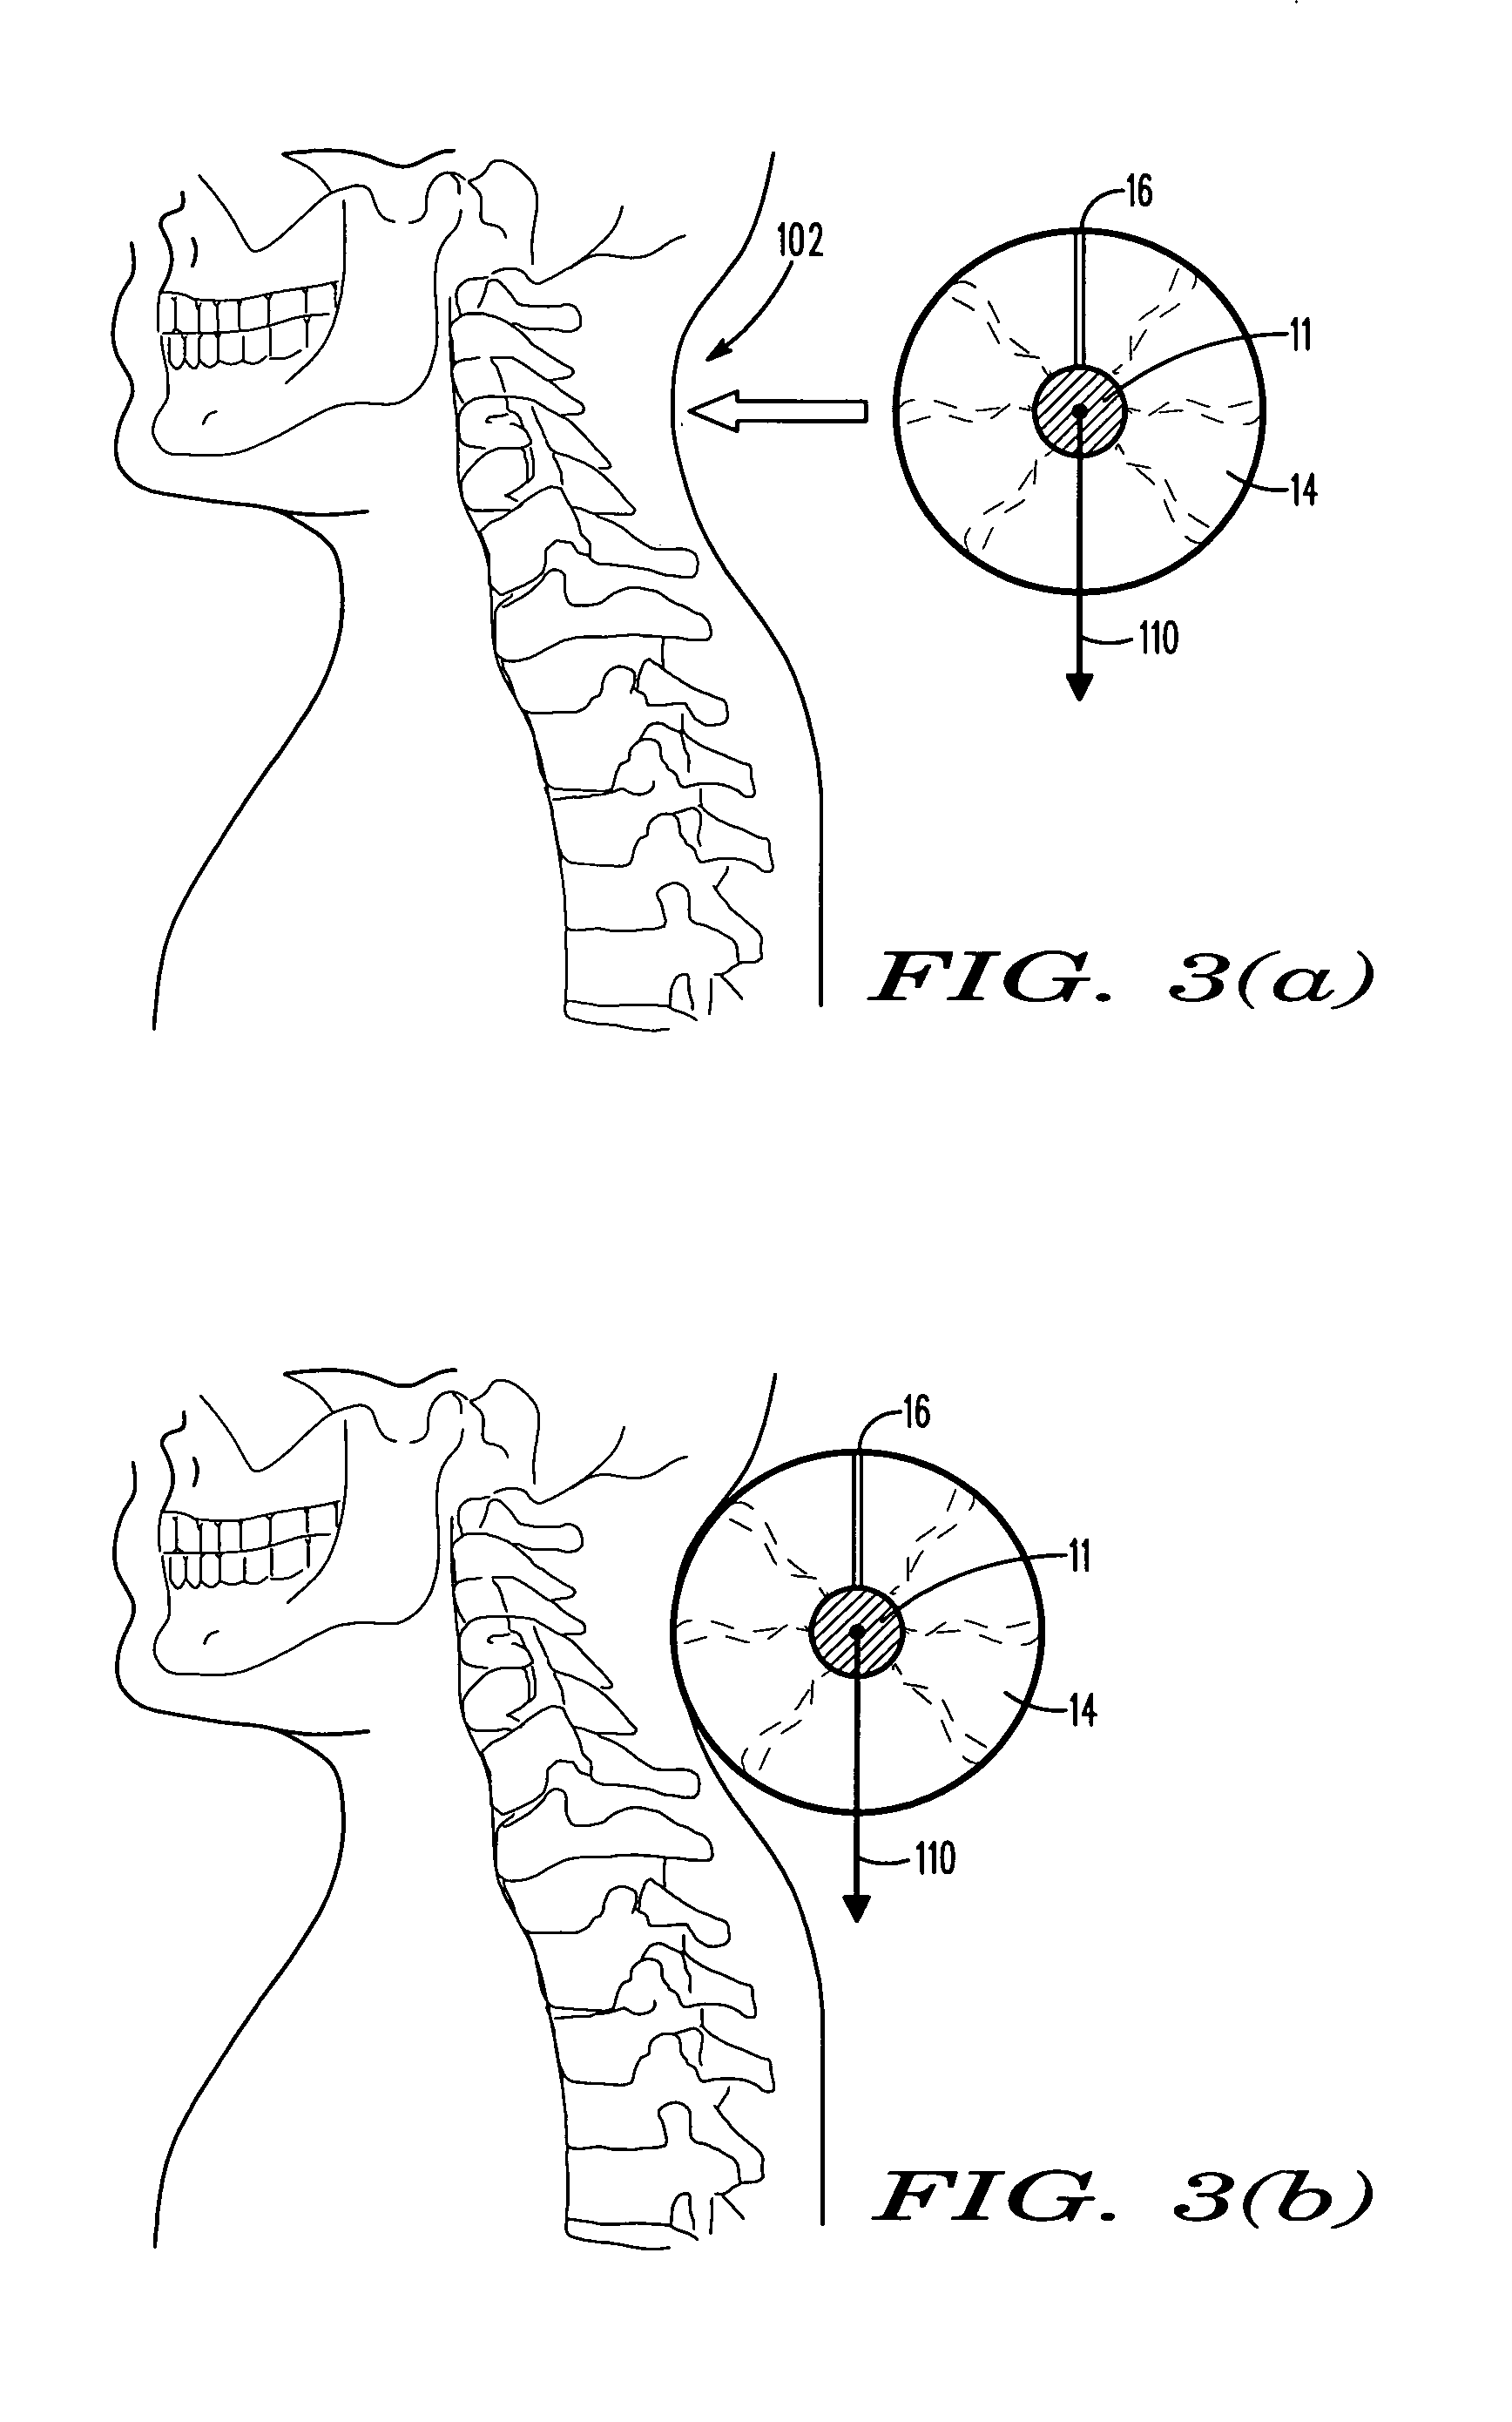 Method and apparatus for improving posture